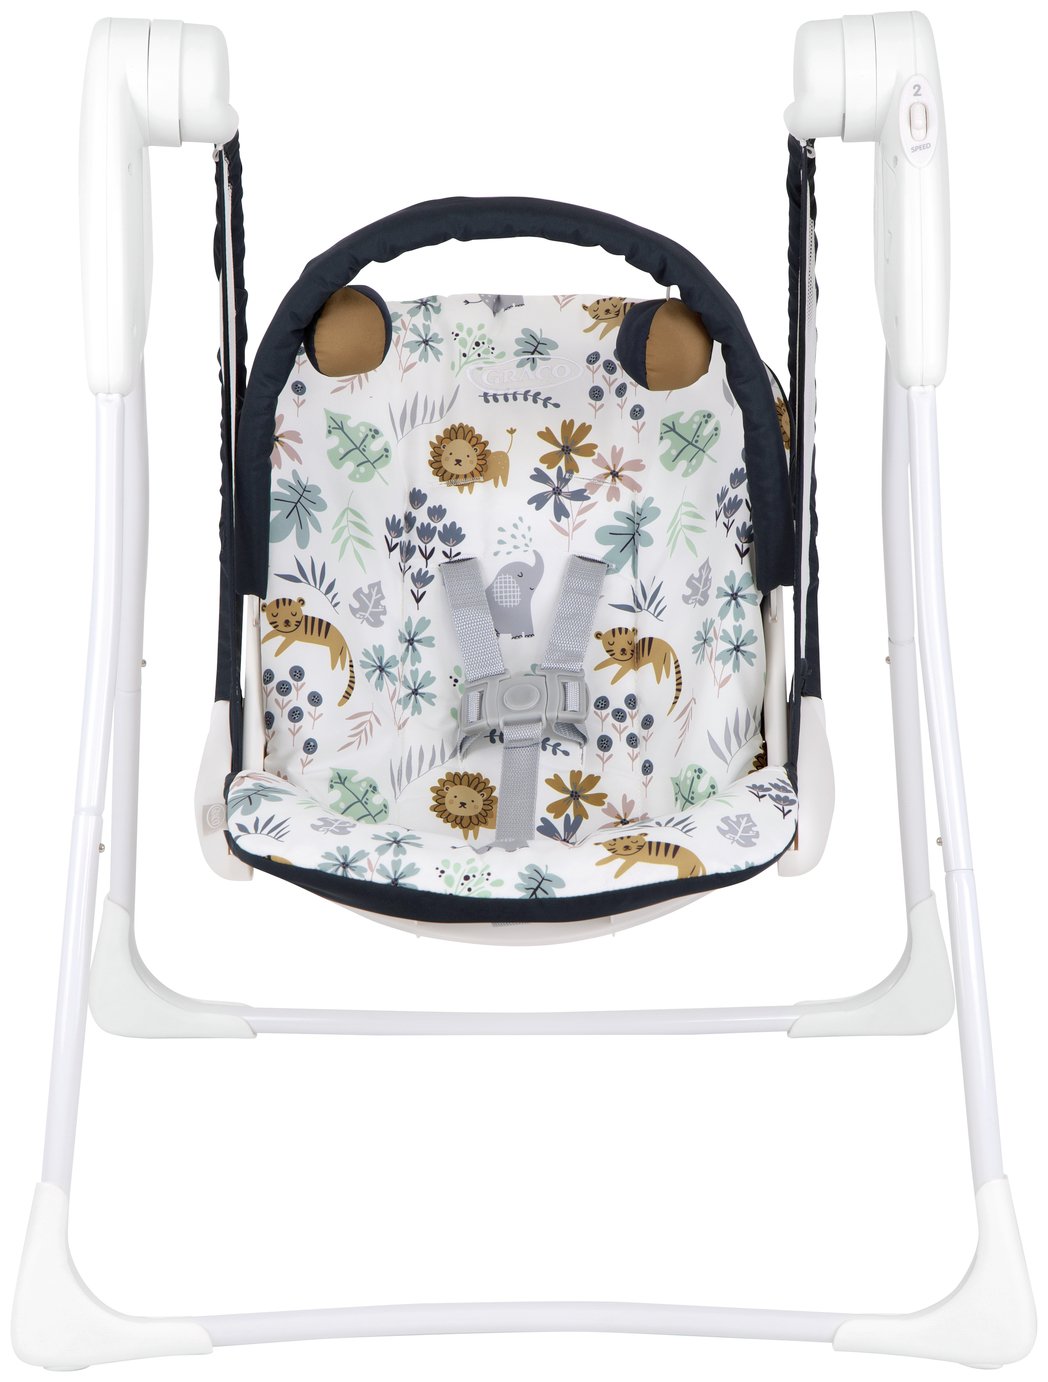 Graco Baby Delight Swing review